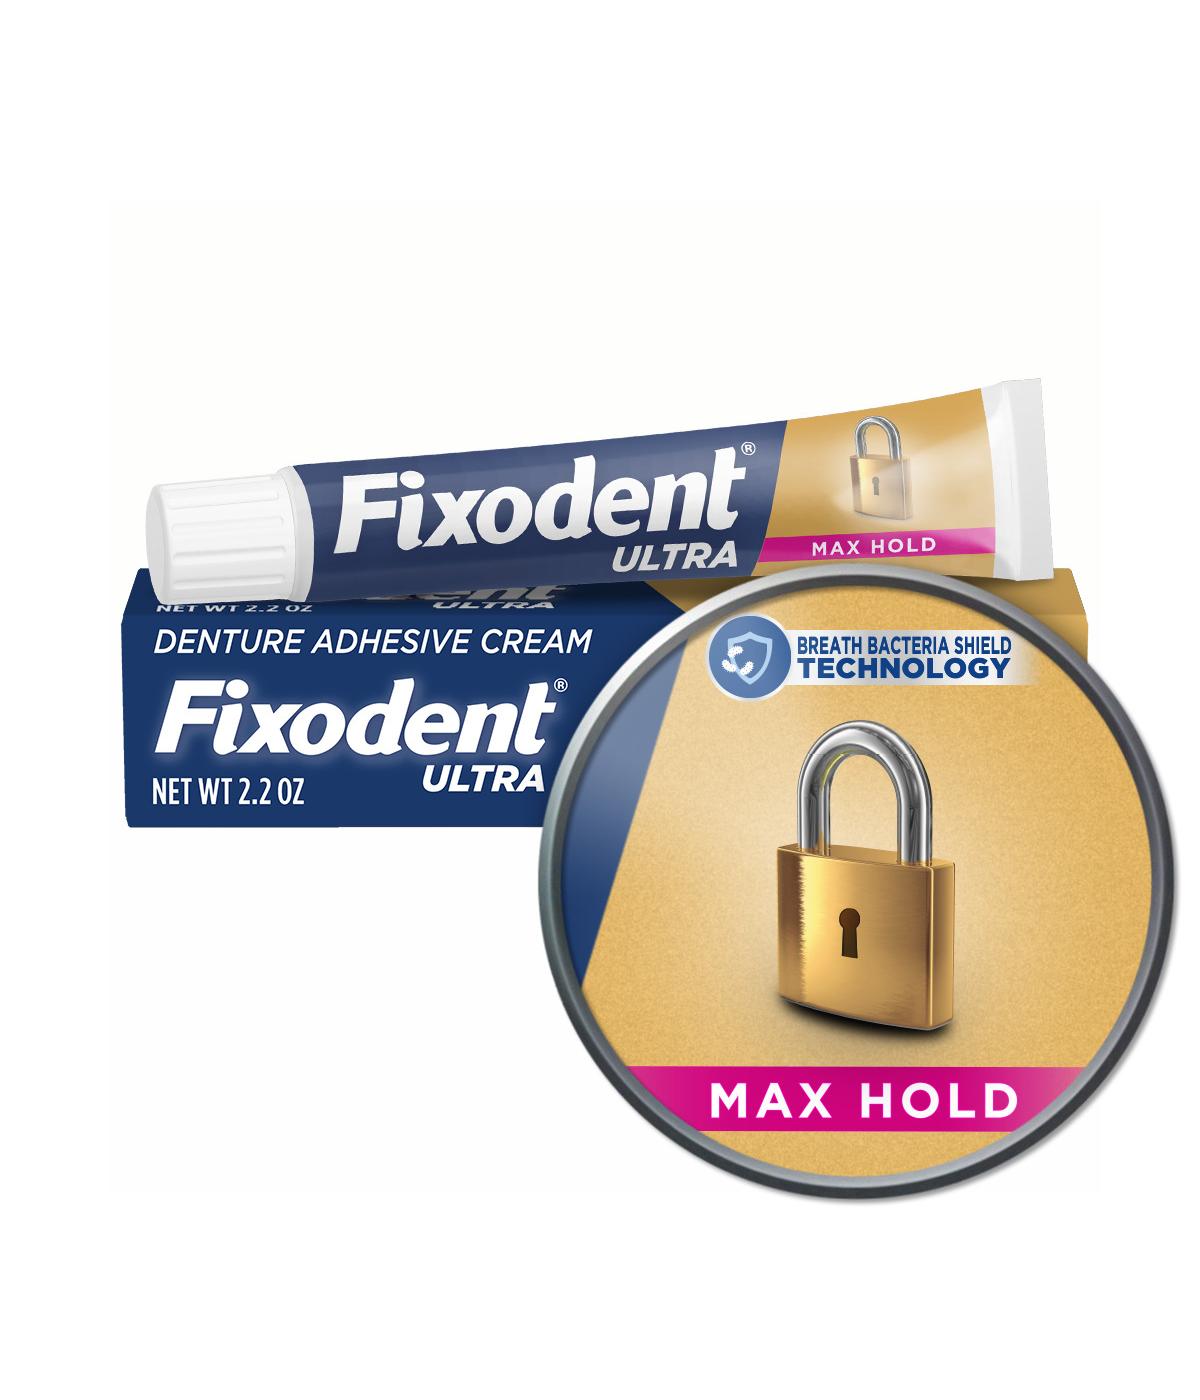 Fixodent Ultra Max Hold Denture Adhesive Cream; image 2 of 4